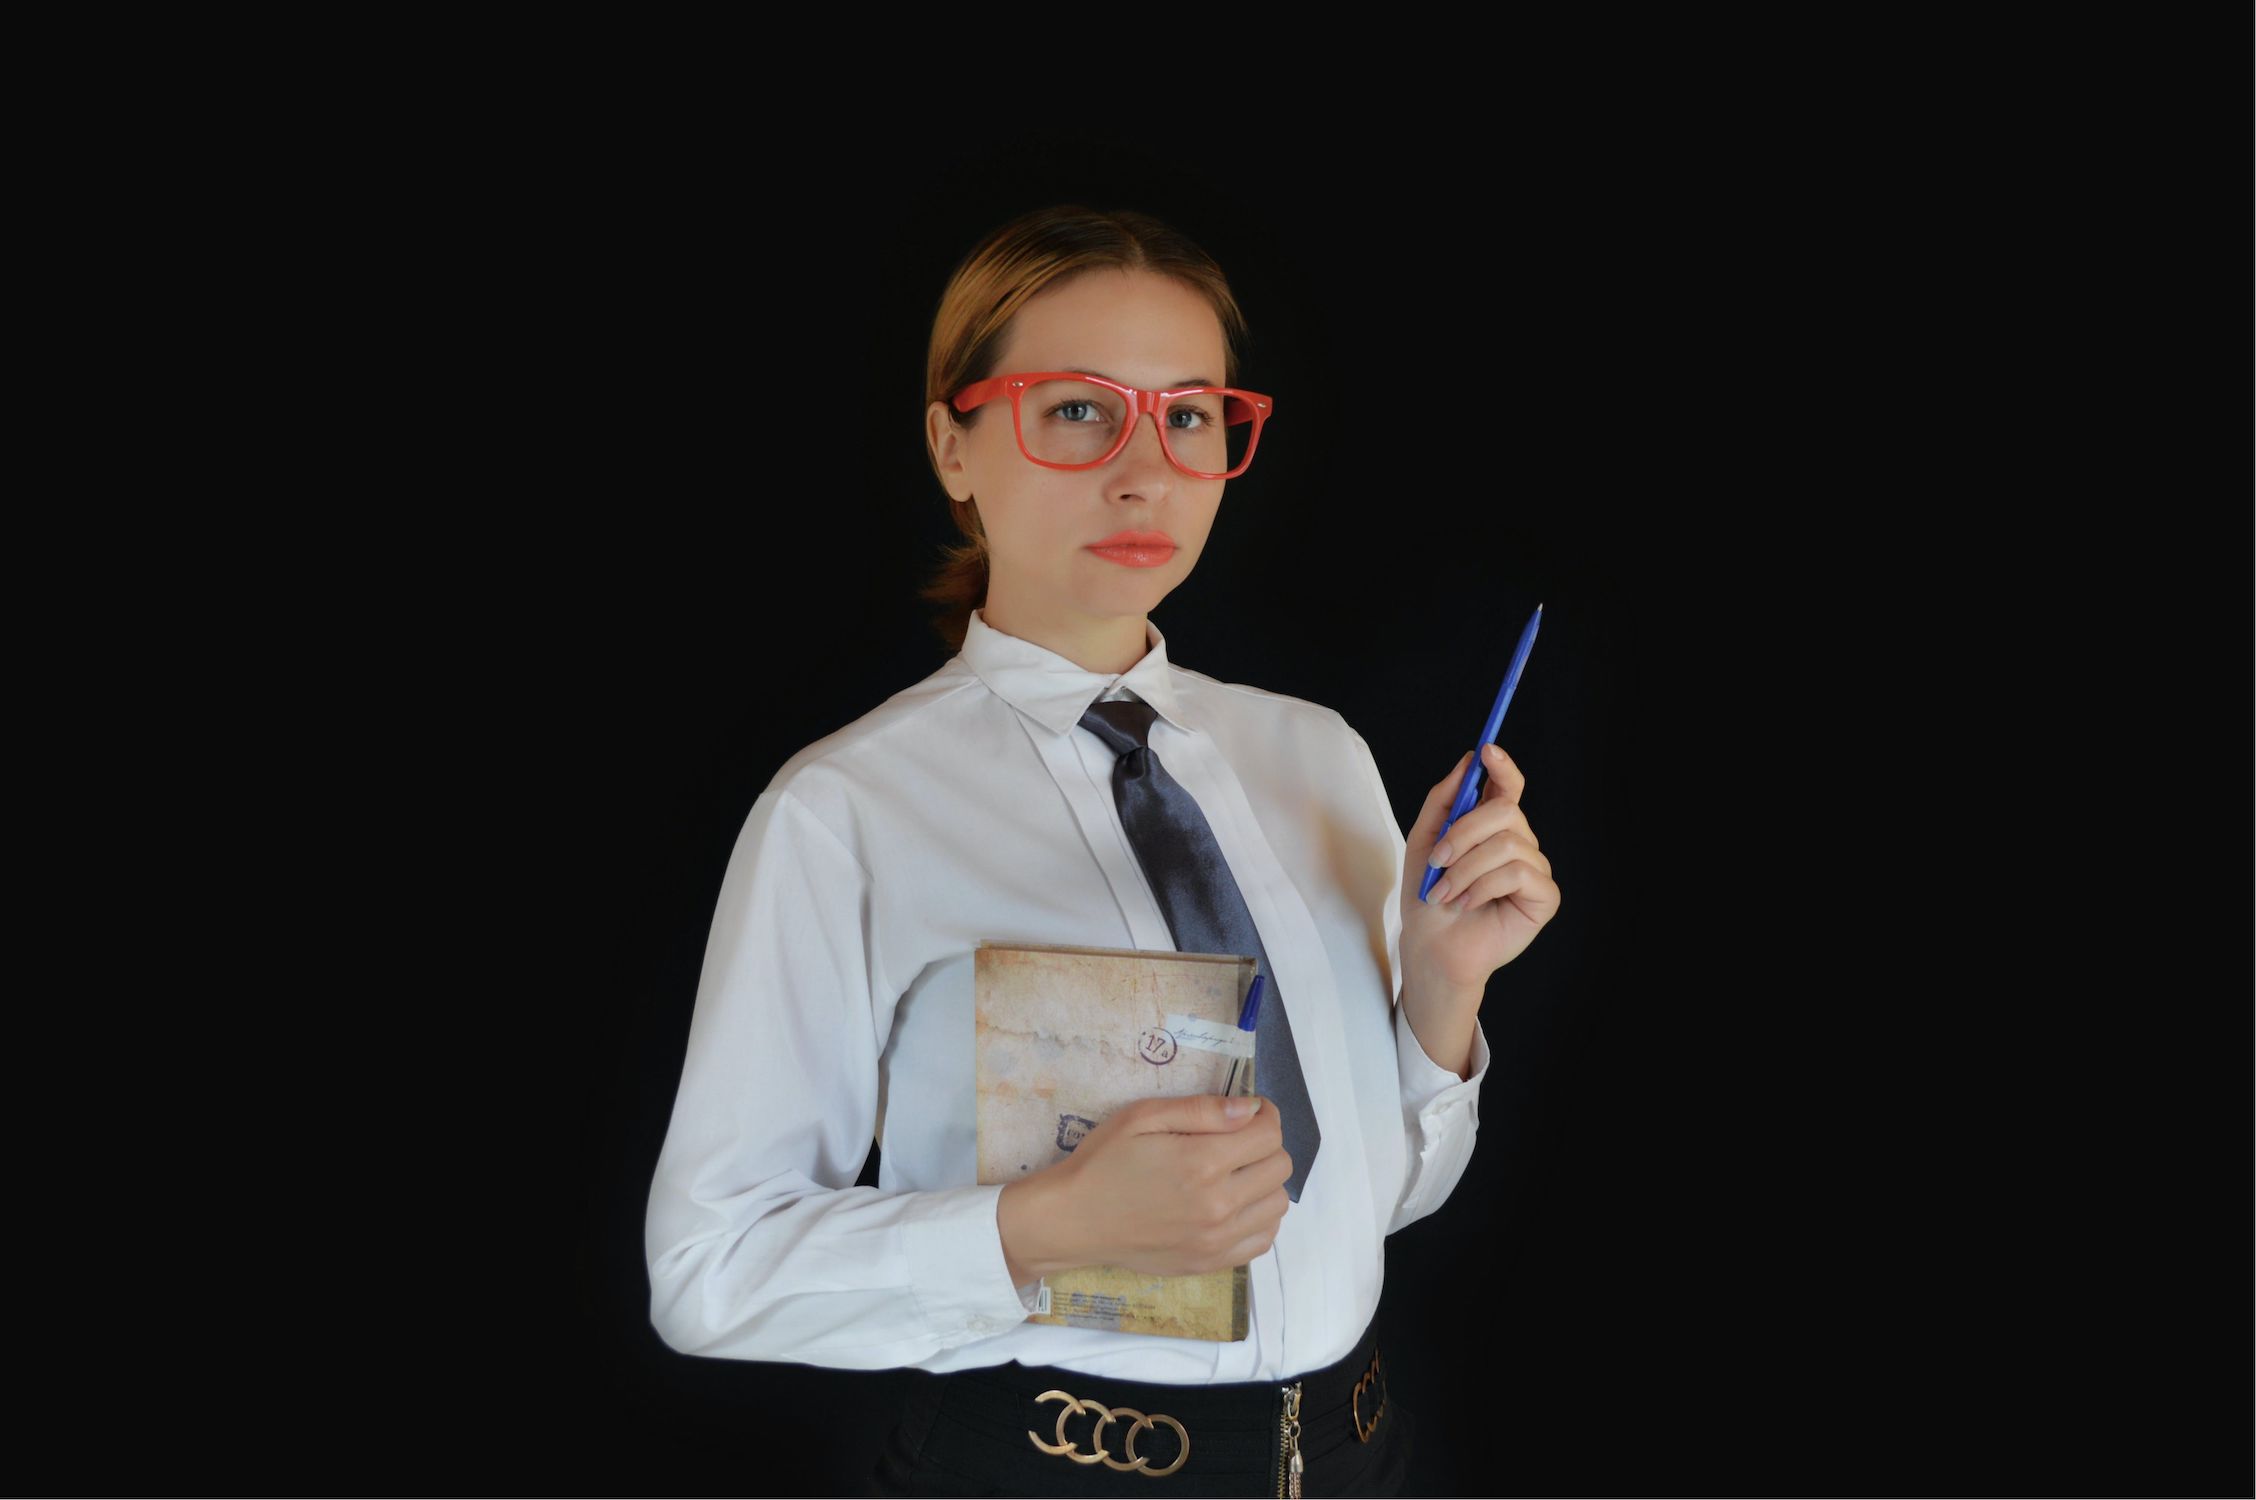 An image of a therapist in professional clothes: a button up shirt and tie. She is holding a pen and notepad and has a serious expression.